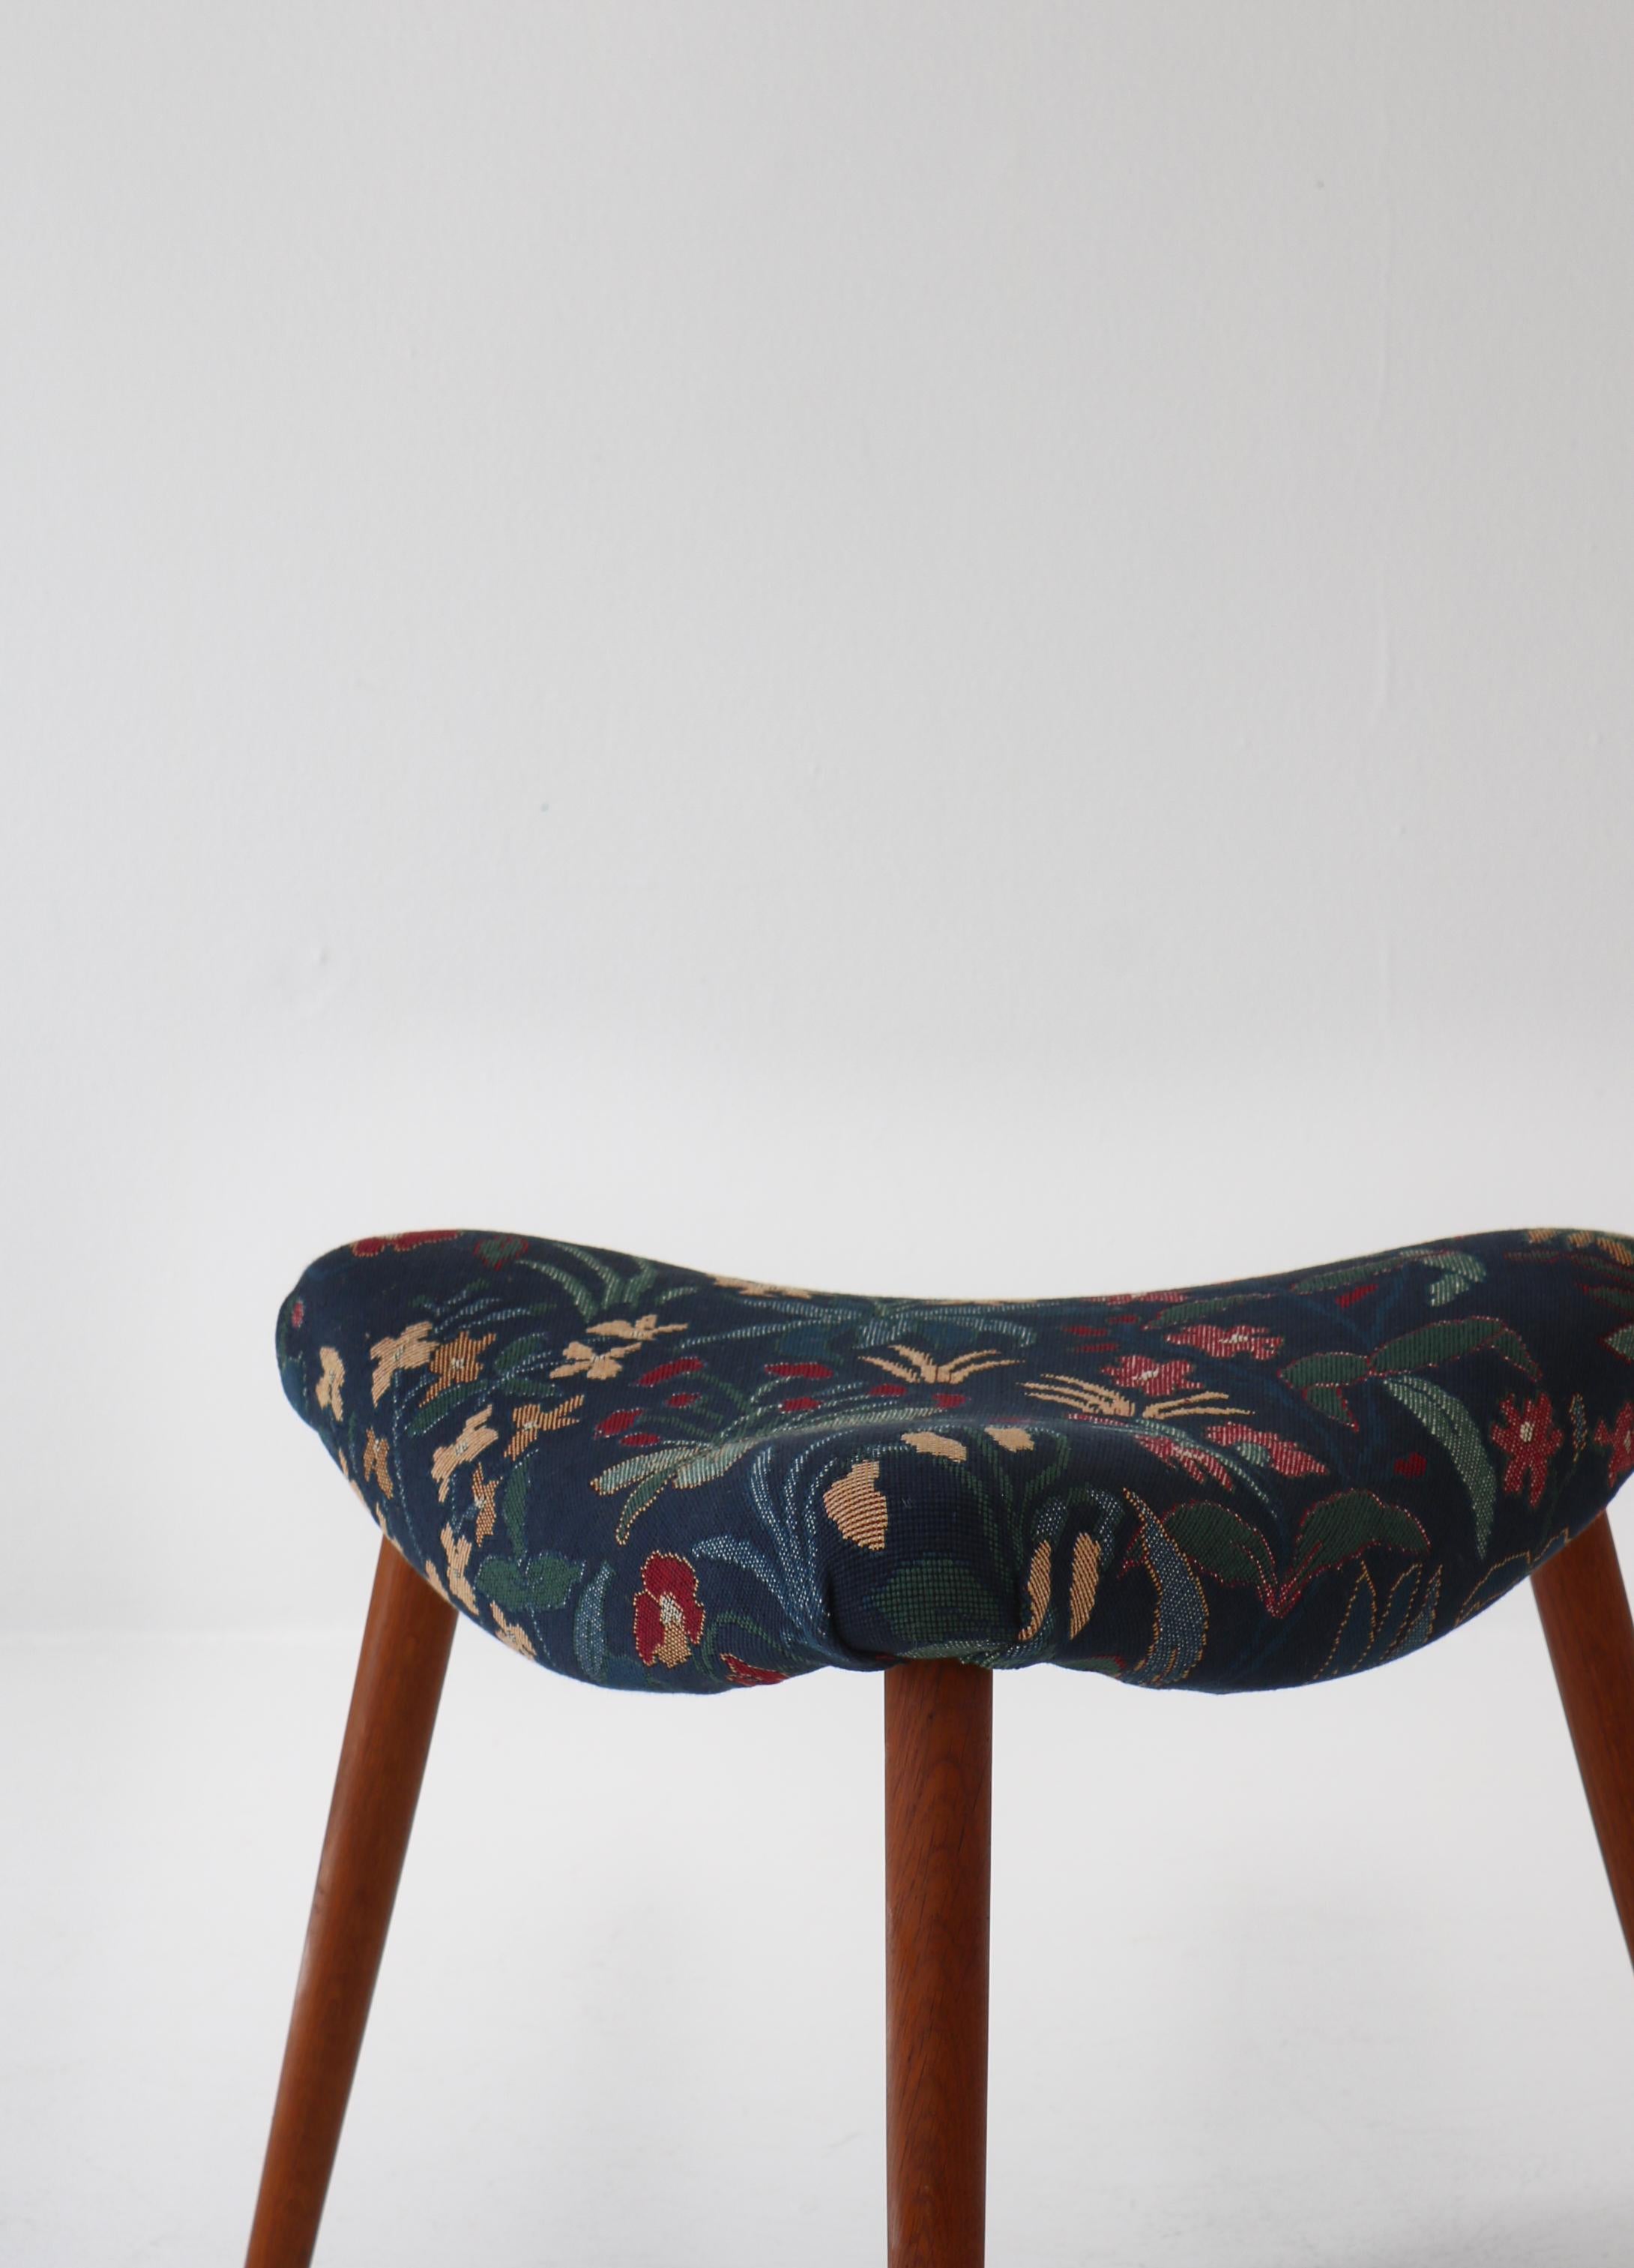 Scandinavian Modern Triangular Stools in Blue Floral Tapestry, 1950s For Sale 4